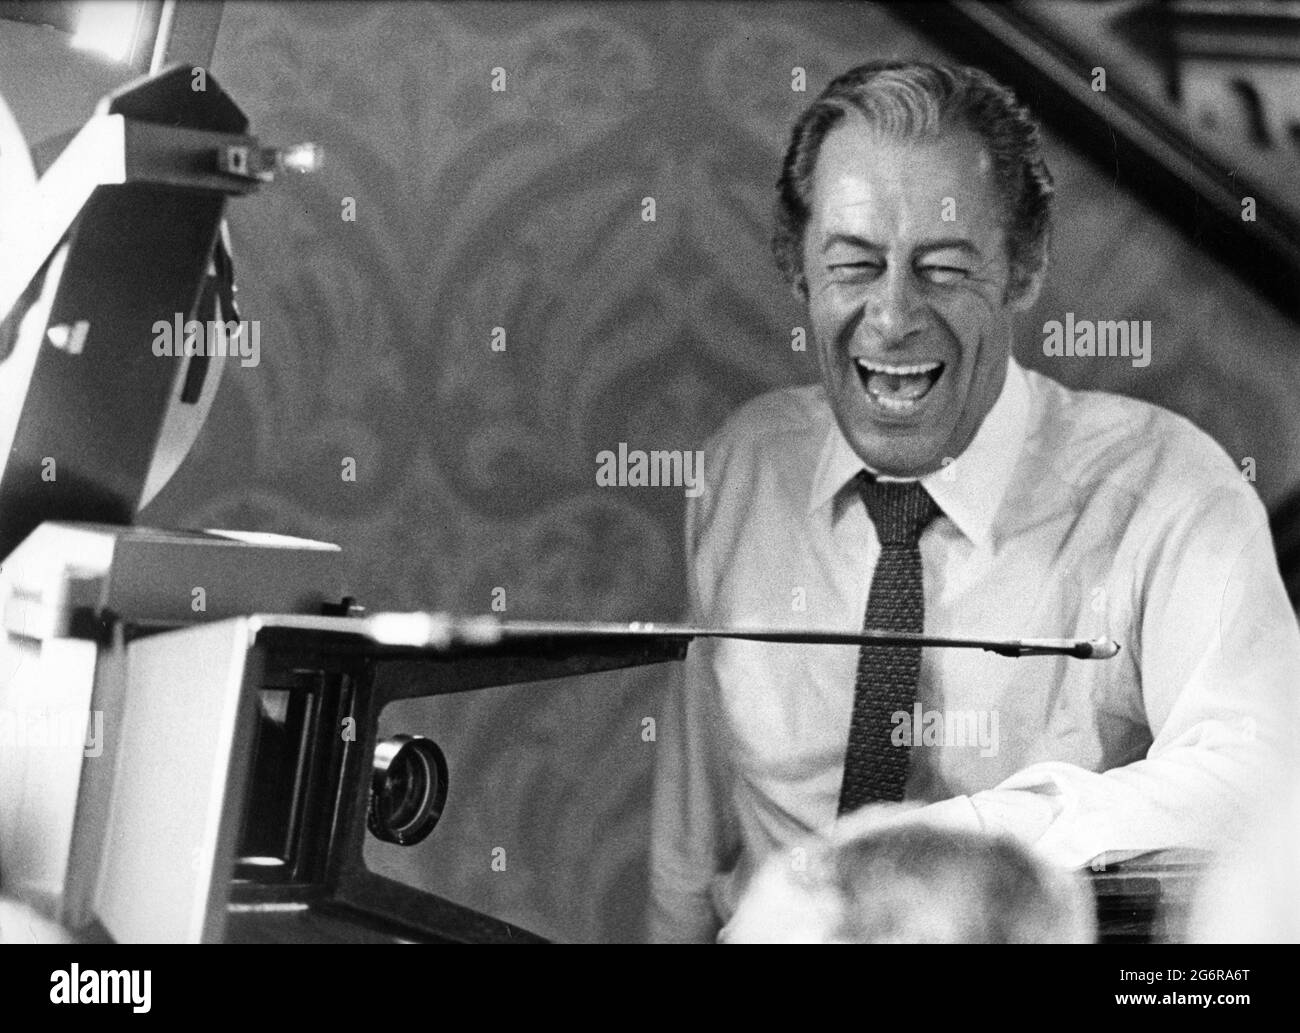 REX HARRISON as Henry Higgins on set candid with Movie Camera during filming of MY FAIR LADY 1964 director GEORGE CUKOR from the Broadway musical adapted from the play Pygmalion by George Bernard Shaw screenplay book and lyrics Alan Jay Lerner  music Frederick Loewe production design and costumes Cecil Beaton producer Jack L.Warner Warner Bros. Stock Photo